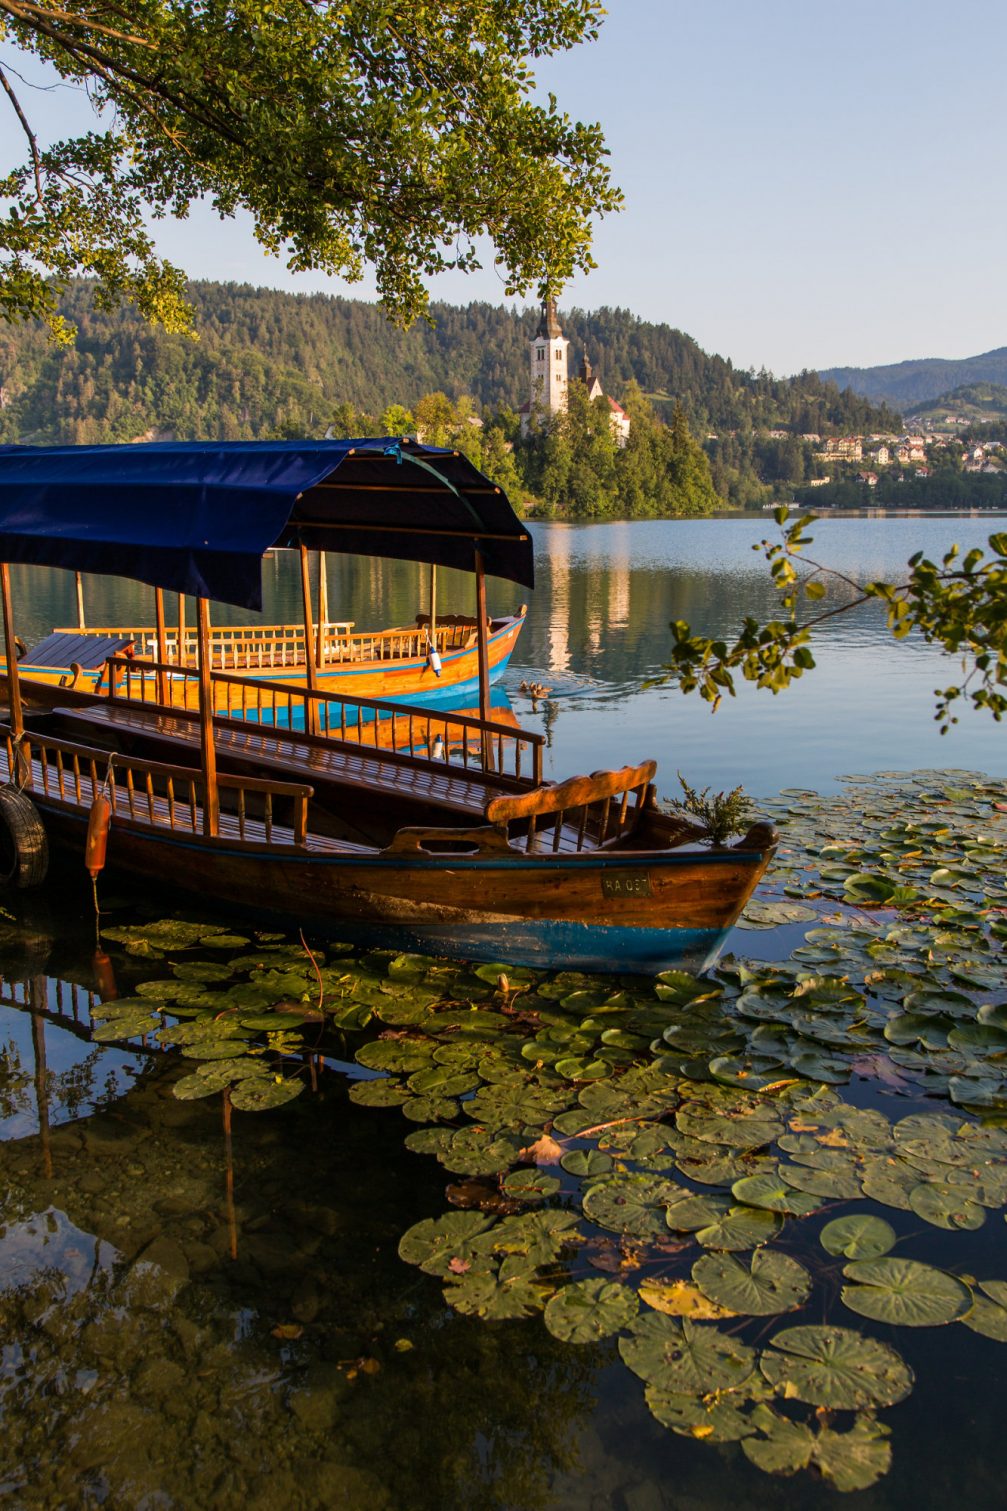 A traditional pletna boat Lake Bled in Slovenia